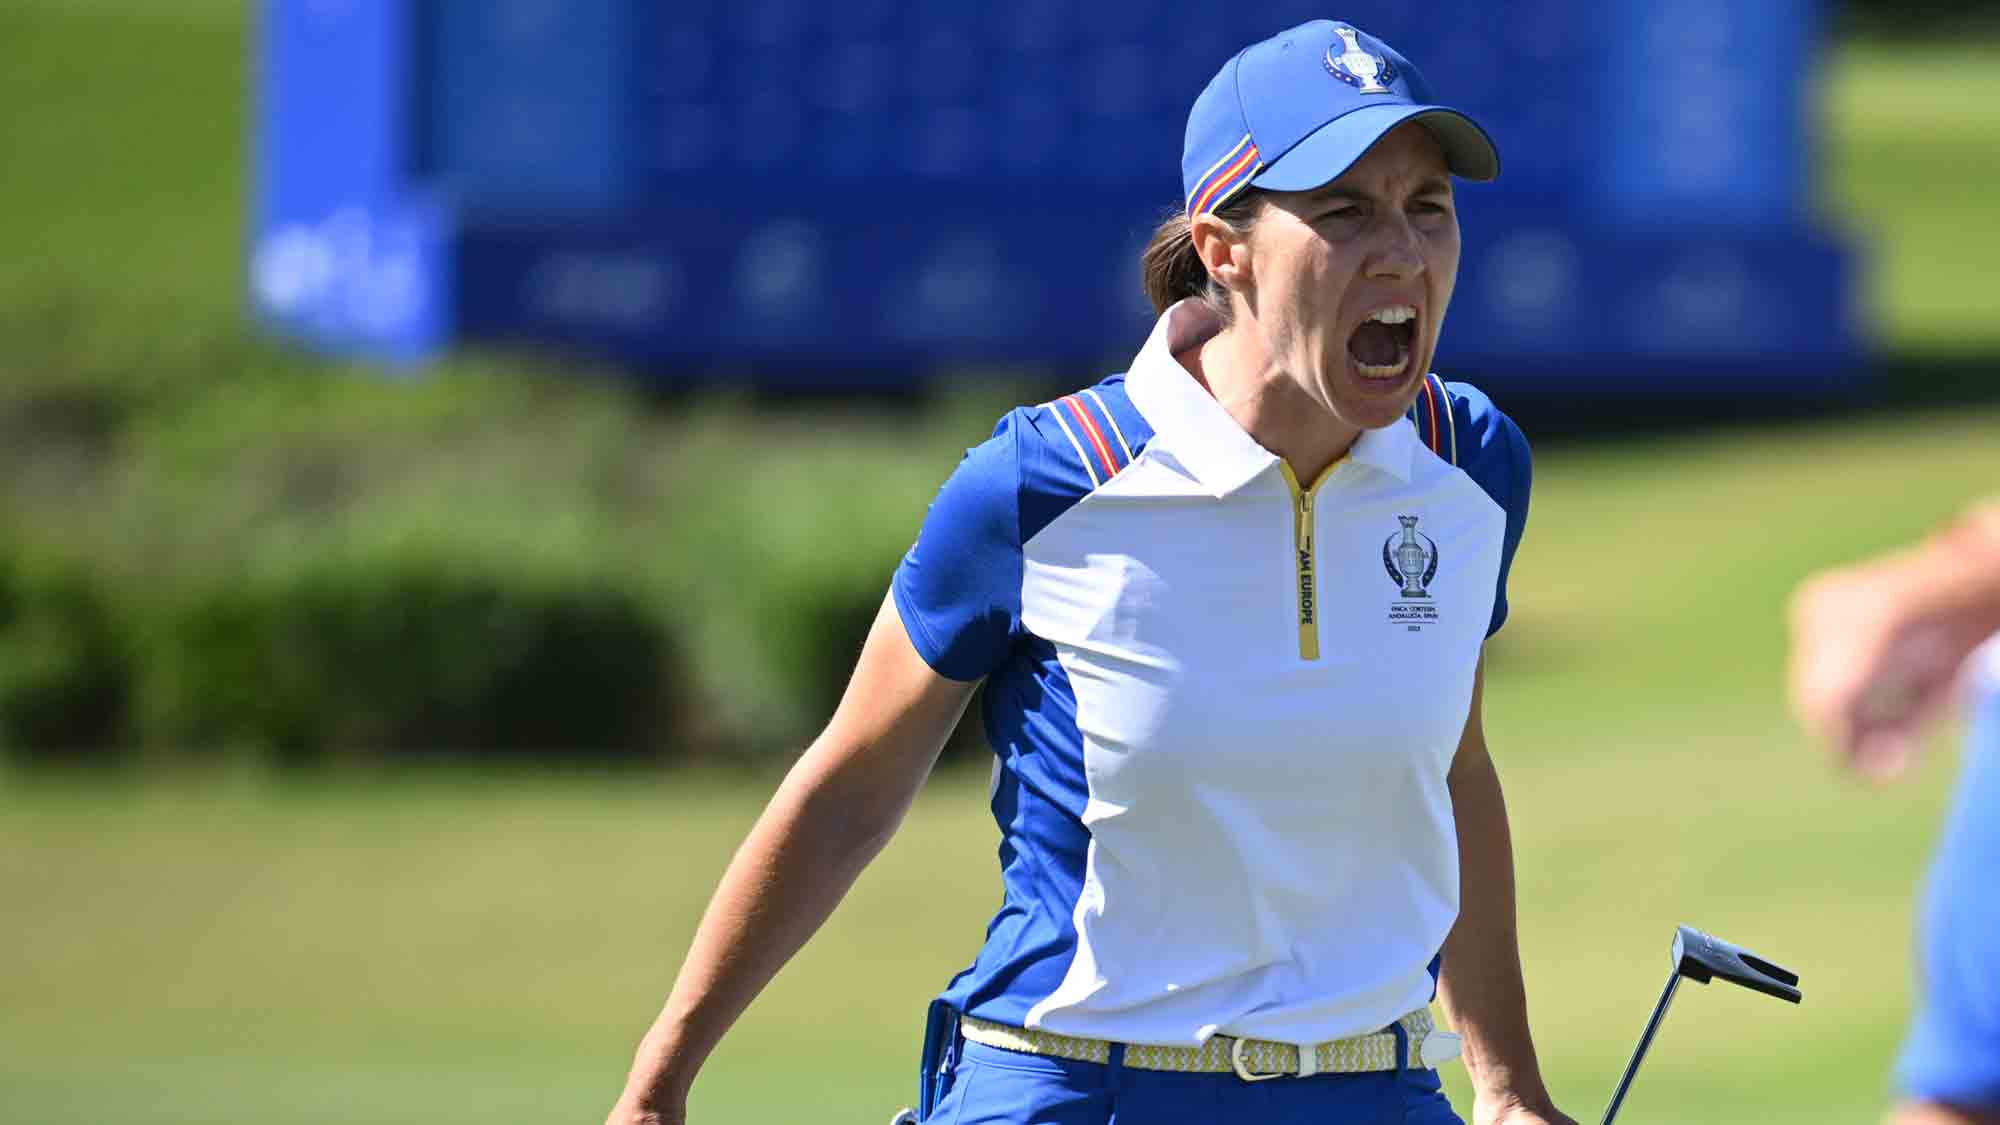 Solheim Cup Rose Zhang trounced by LPGA fan favorite Leona Maguire